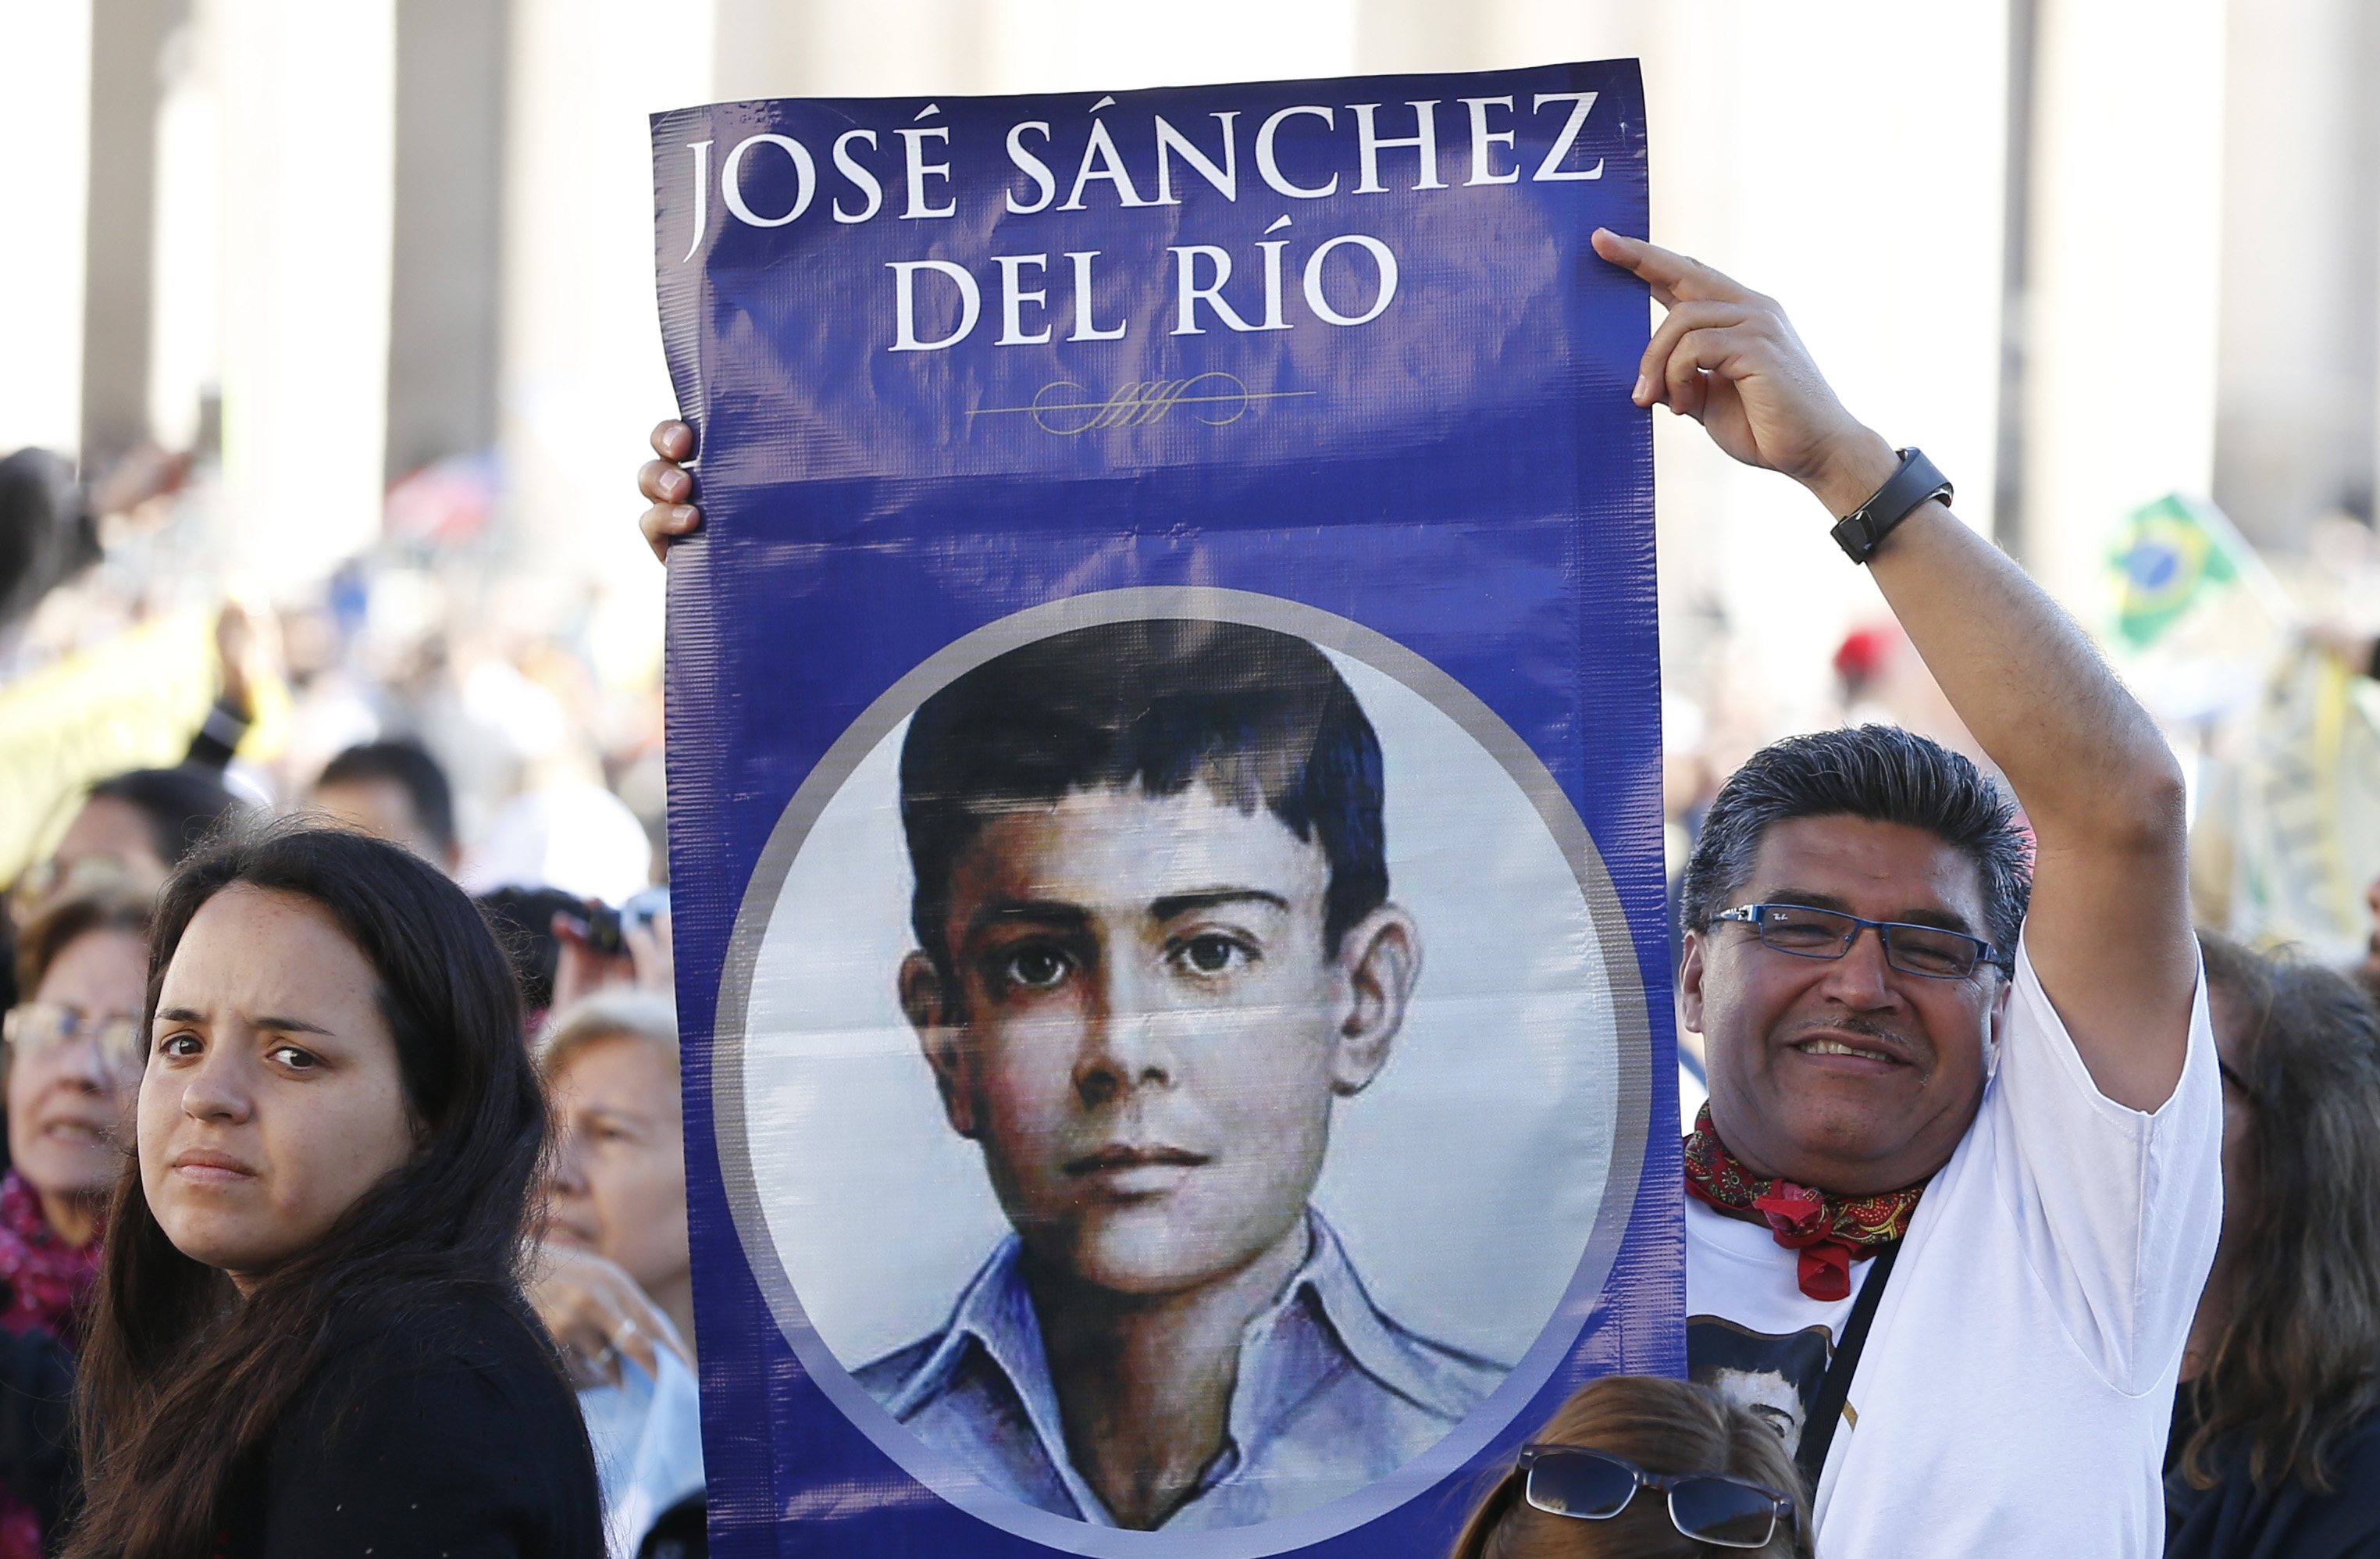 A man holds an image of new Mexican St. Jose Sanchez del Rio, who was martyred at the age of 14 in 1928, before the canonization Mass for seven new saints celebrated by Pope Francis in St. Peter's Square at the Vatican Oct. 16. (CNS photo/Paul Haring)